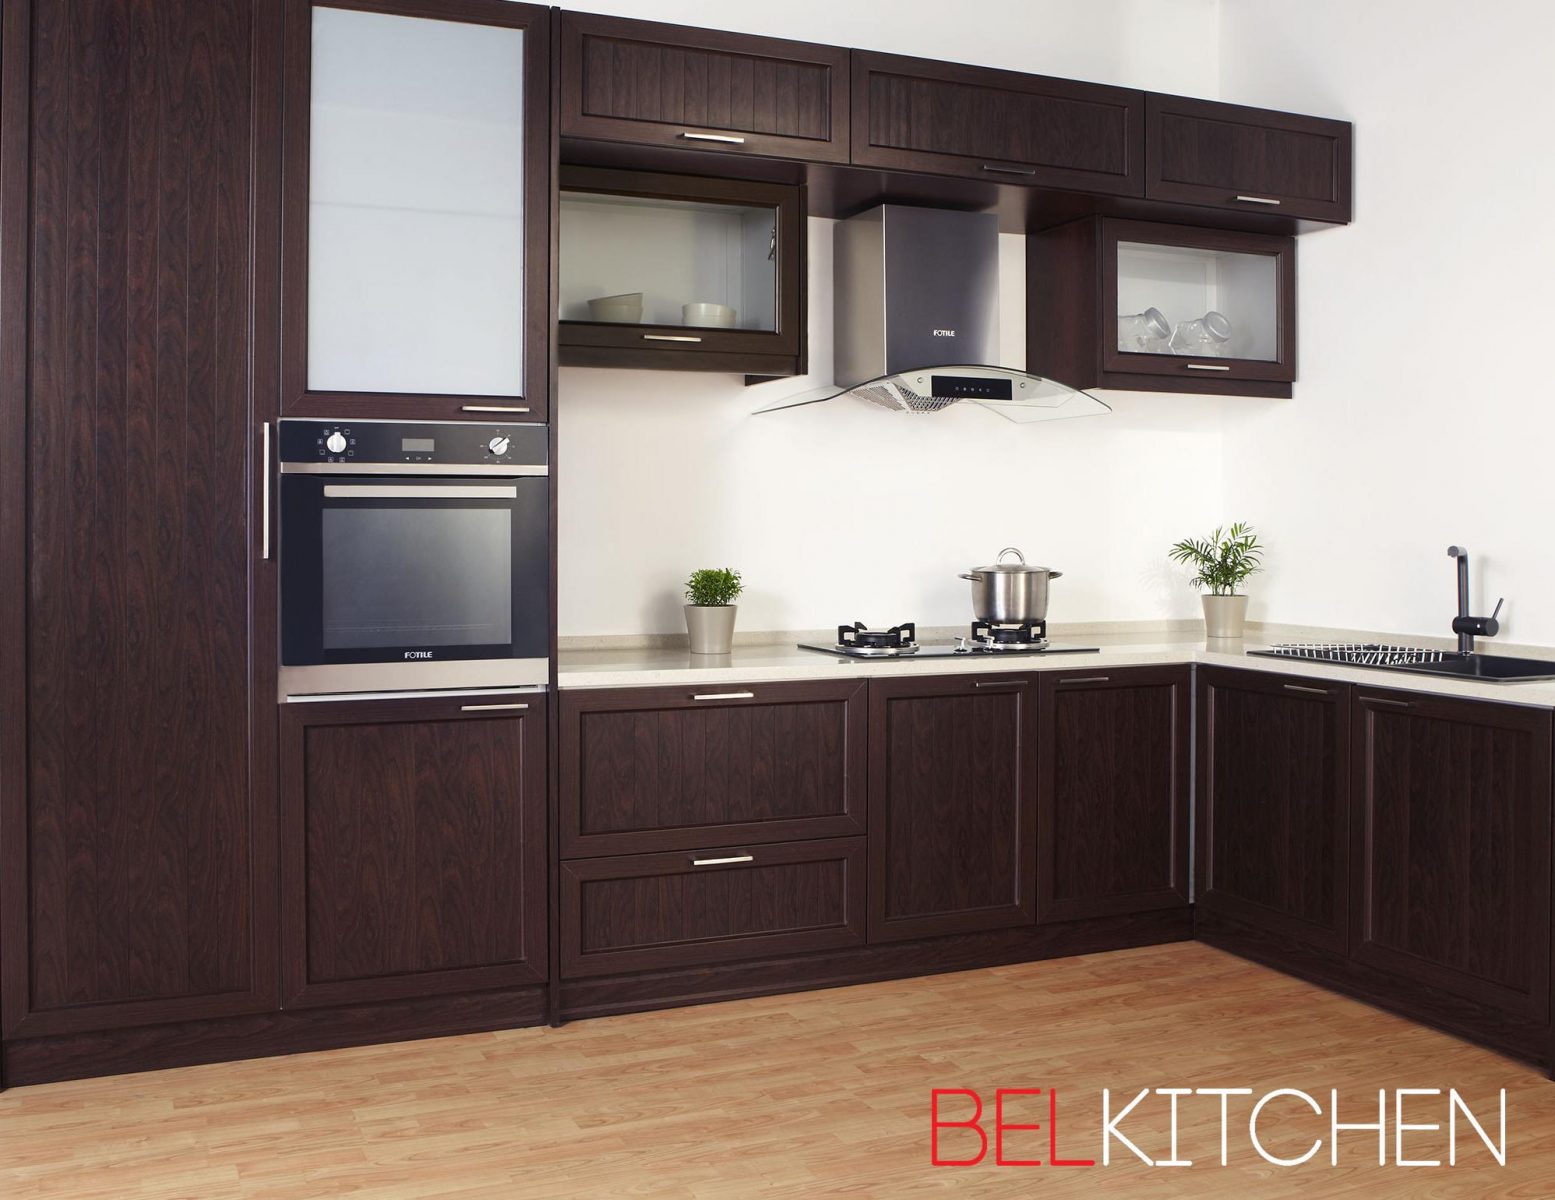 Aluminium Kitchen Cabinets Are the Latest Kitchen Trend For 20 Reasons